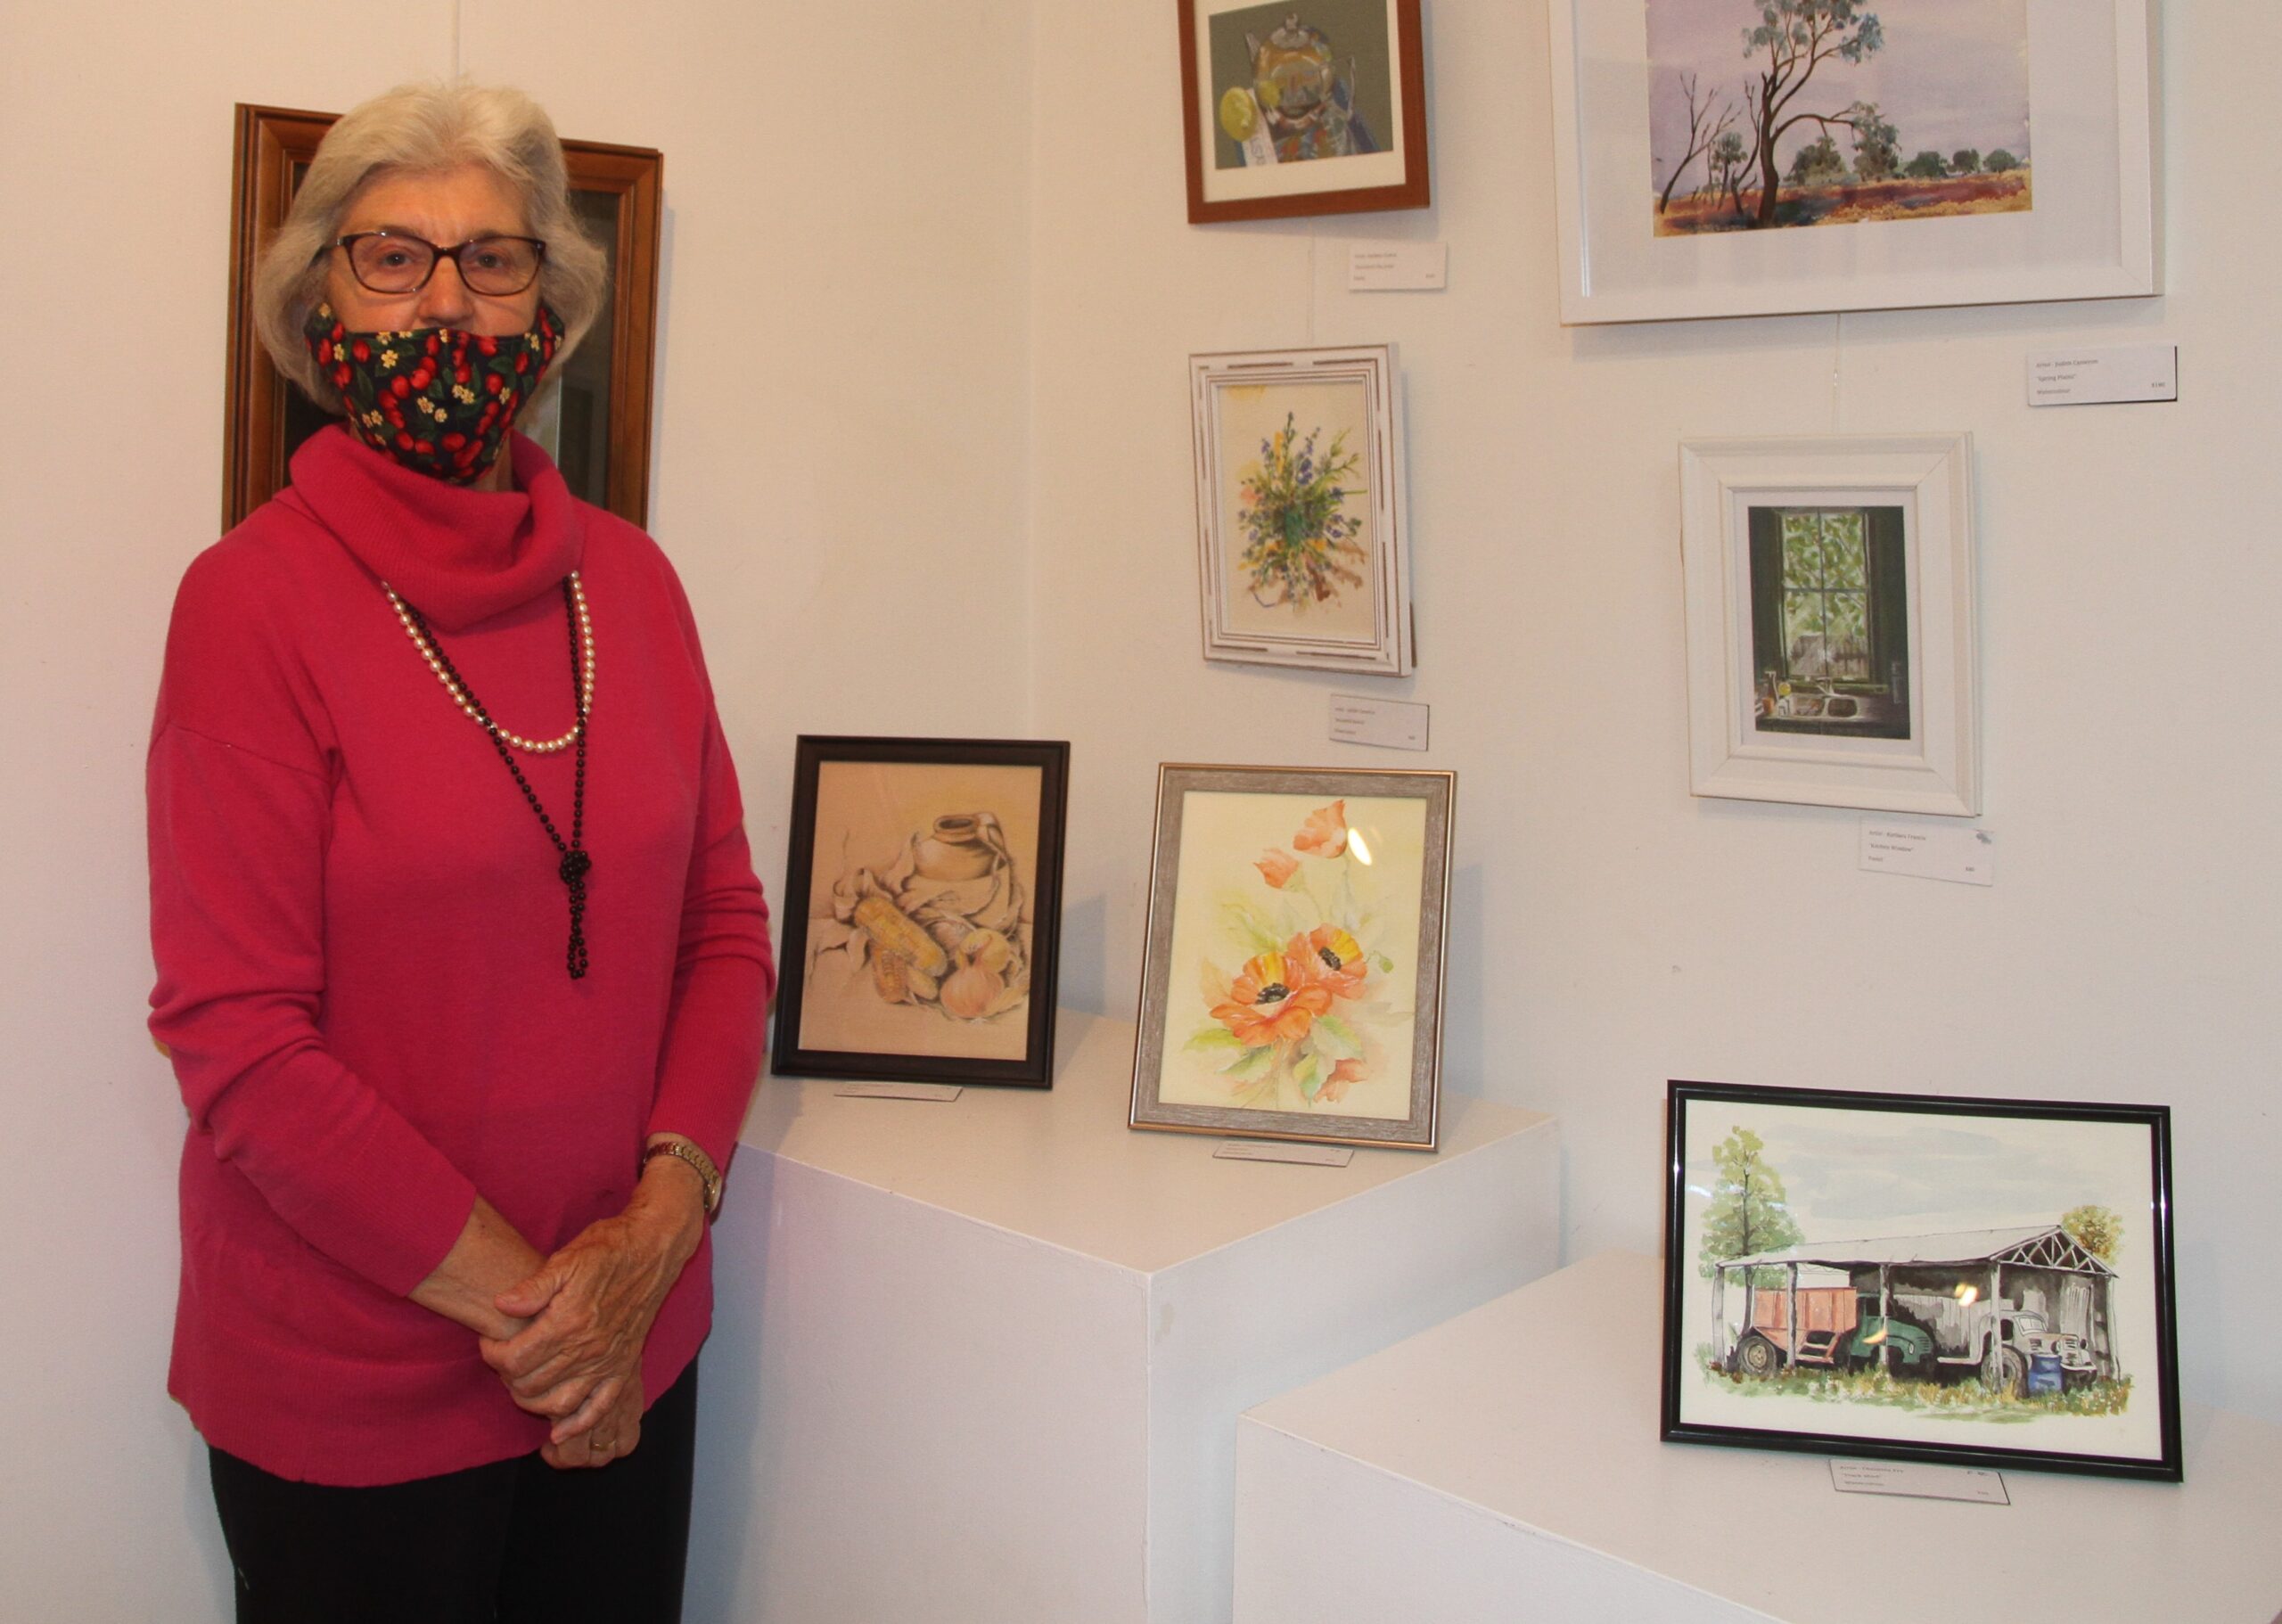 Christine Fry with three paintings (standing on display plinths), from left, ‘Kitchen’ pastels, ‘Flowers’ watercolour, ‘Track Shed’ watercolour.